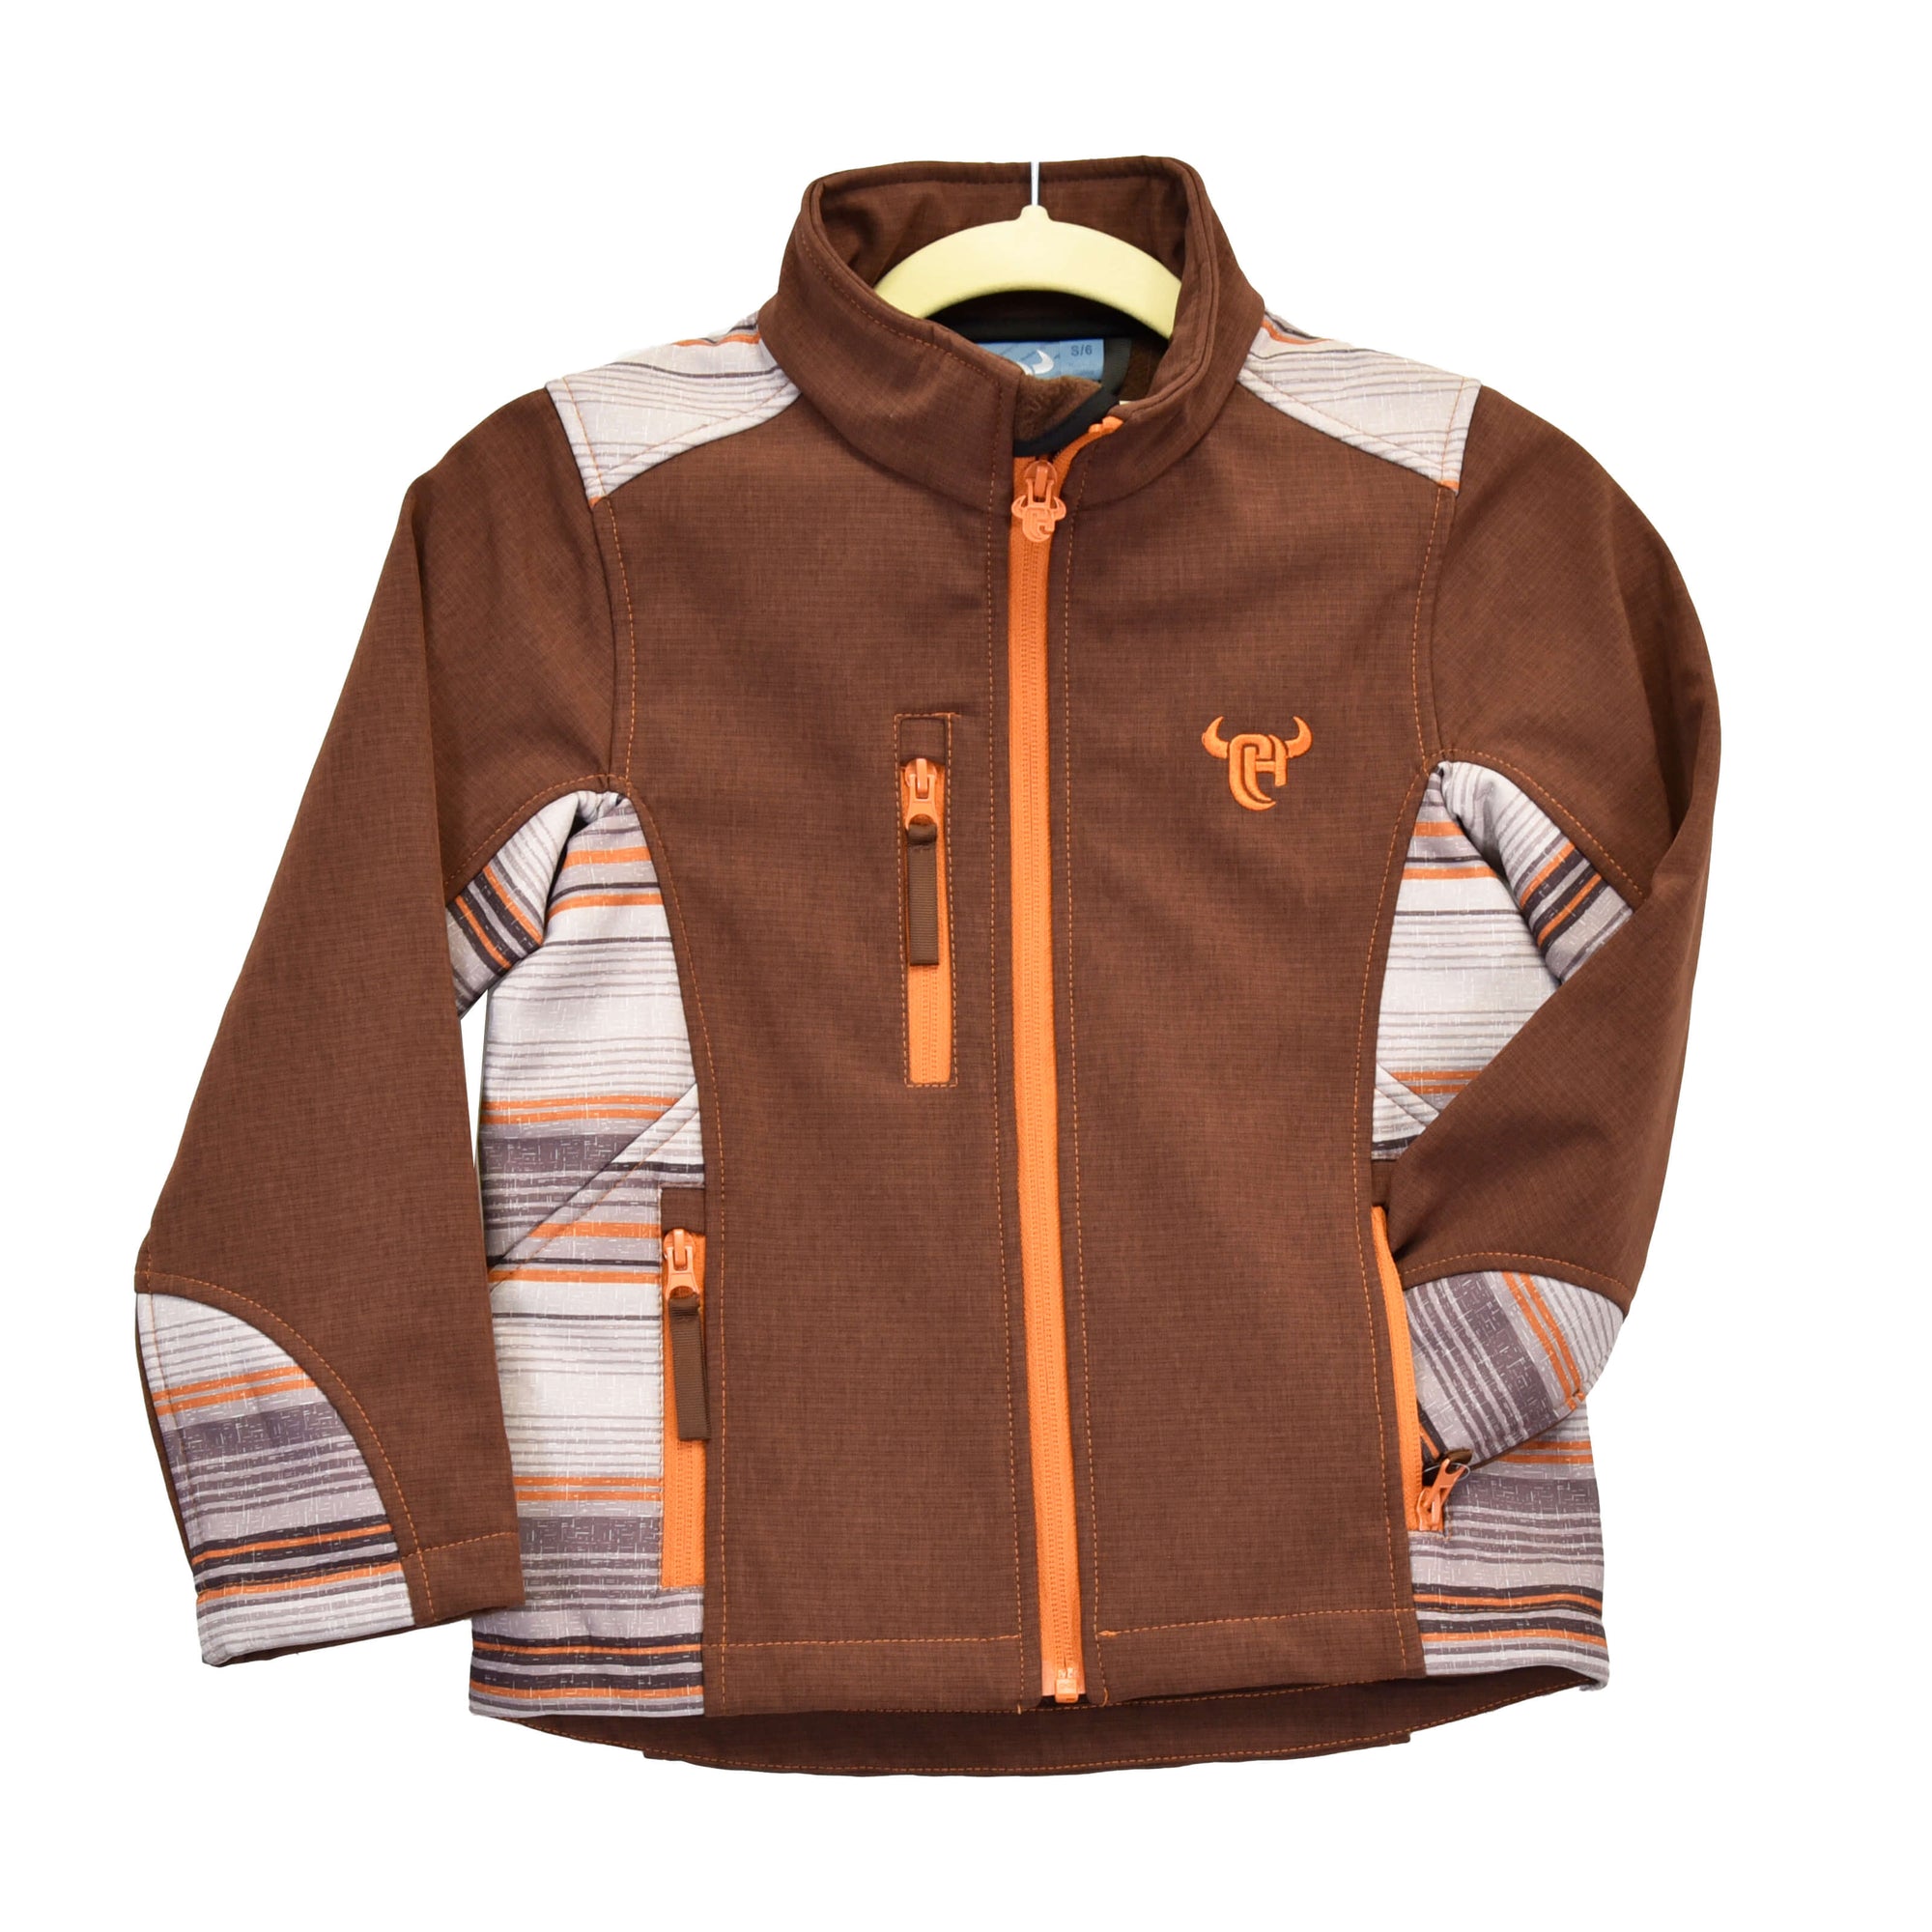 Toddler Boy's Reversed Brown Desert Serape Poly Shell Jacket with Serape in Orange, Dark Brown and Grey Stripes. from Cowboy Hardware